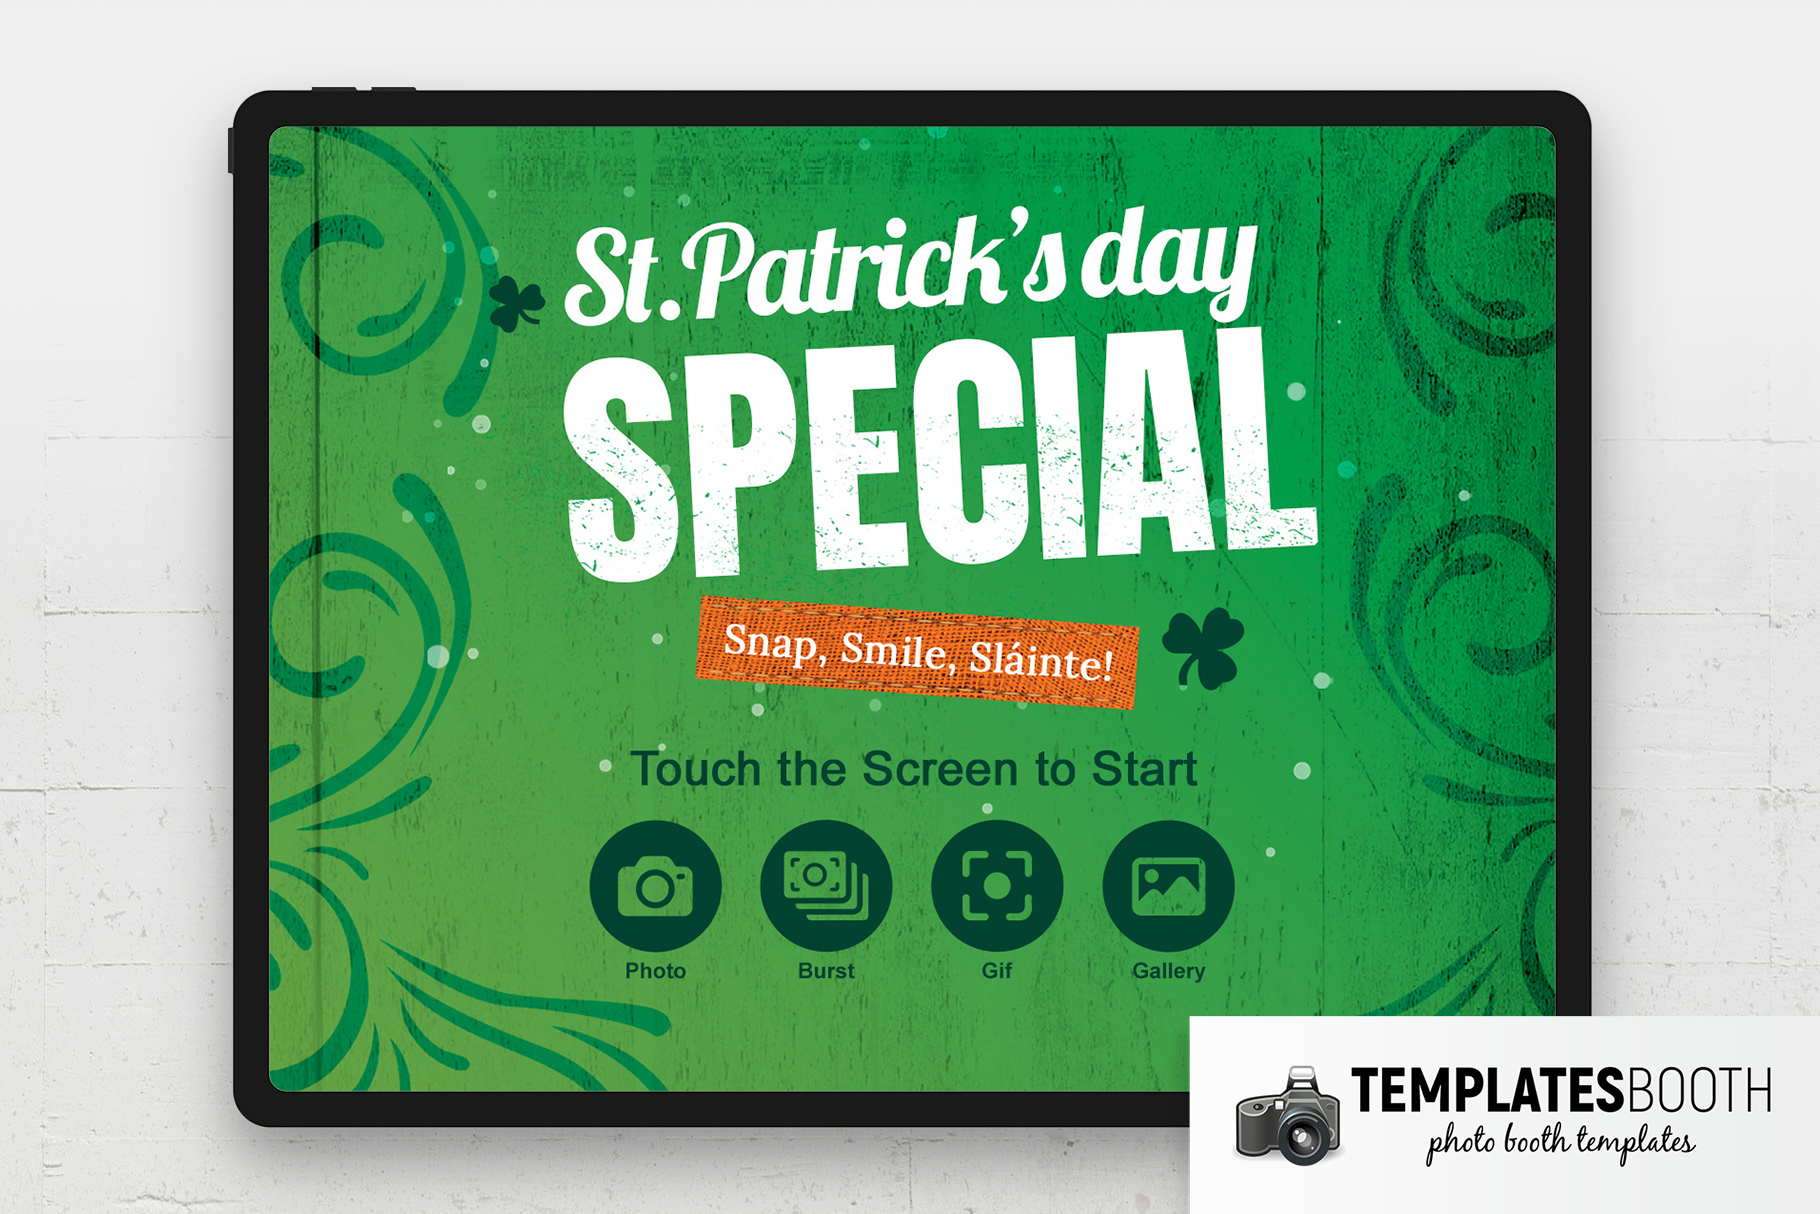 St. Patrick's Day Photo Booth Welcome Screen